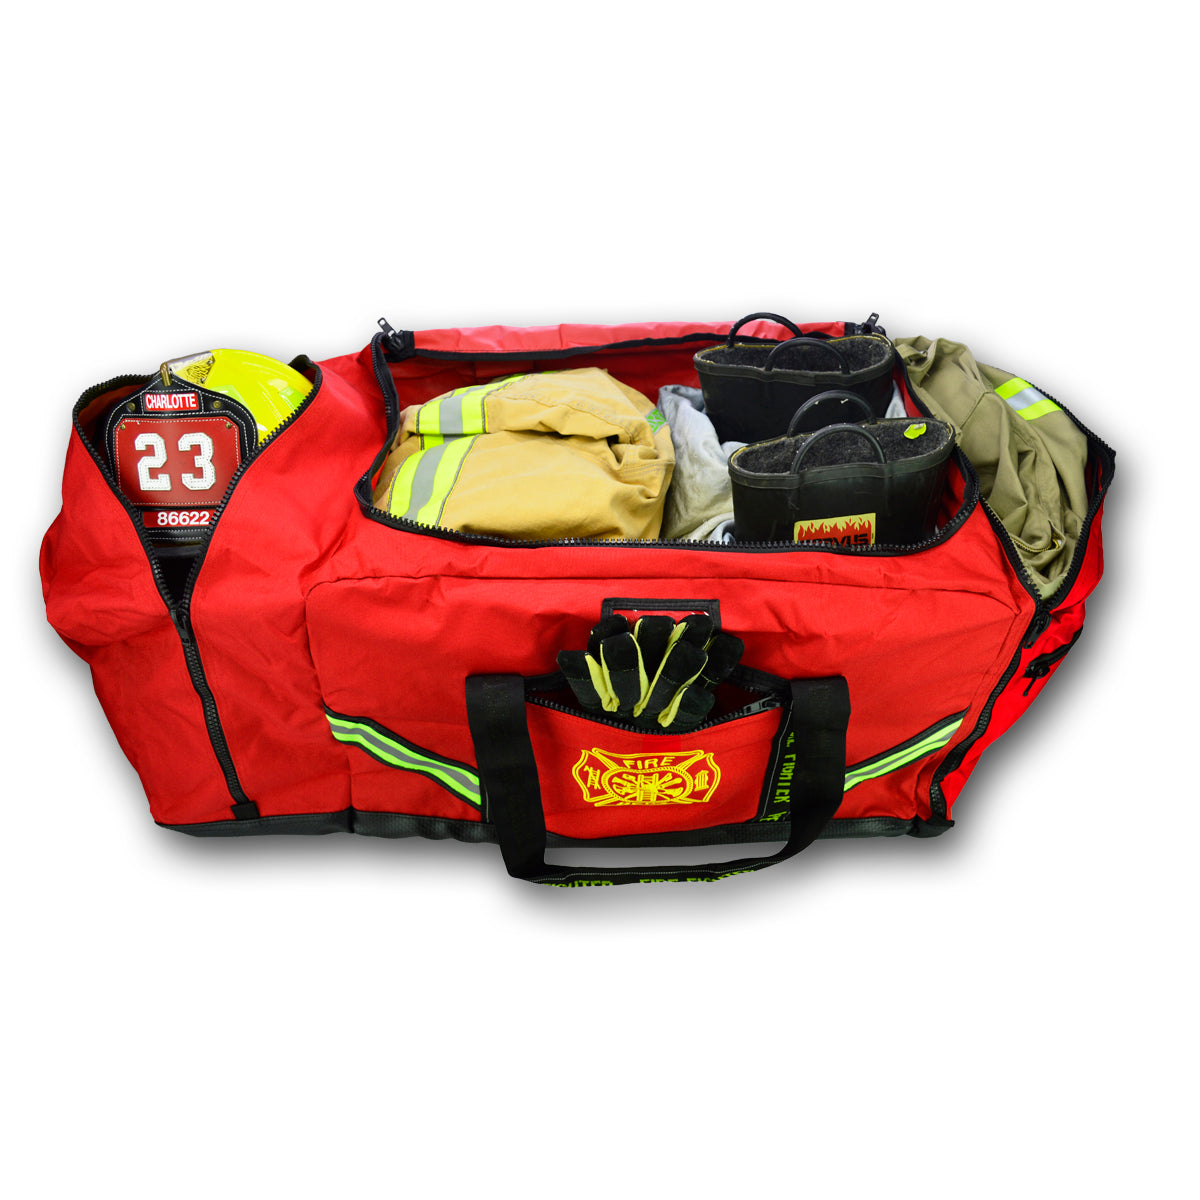 Lightning X Premium 3XL Bunker Gear Bag (LXFB10) | Fire Store | Fuego Fire Center | Firefighter Gear | The Nomex and Kevlar in your turnout gear is highly sensitive to the sun. In fact, ultra-violet rays break down the very material that makes the fabric fire resistant in the first place. Keeping your gear clean and storing it in a turnout bag are the two most important factors for extending the life of your department's investment.